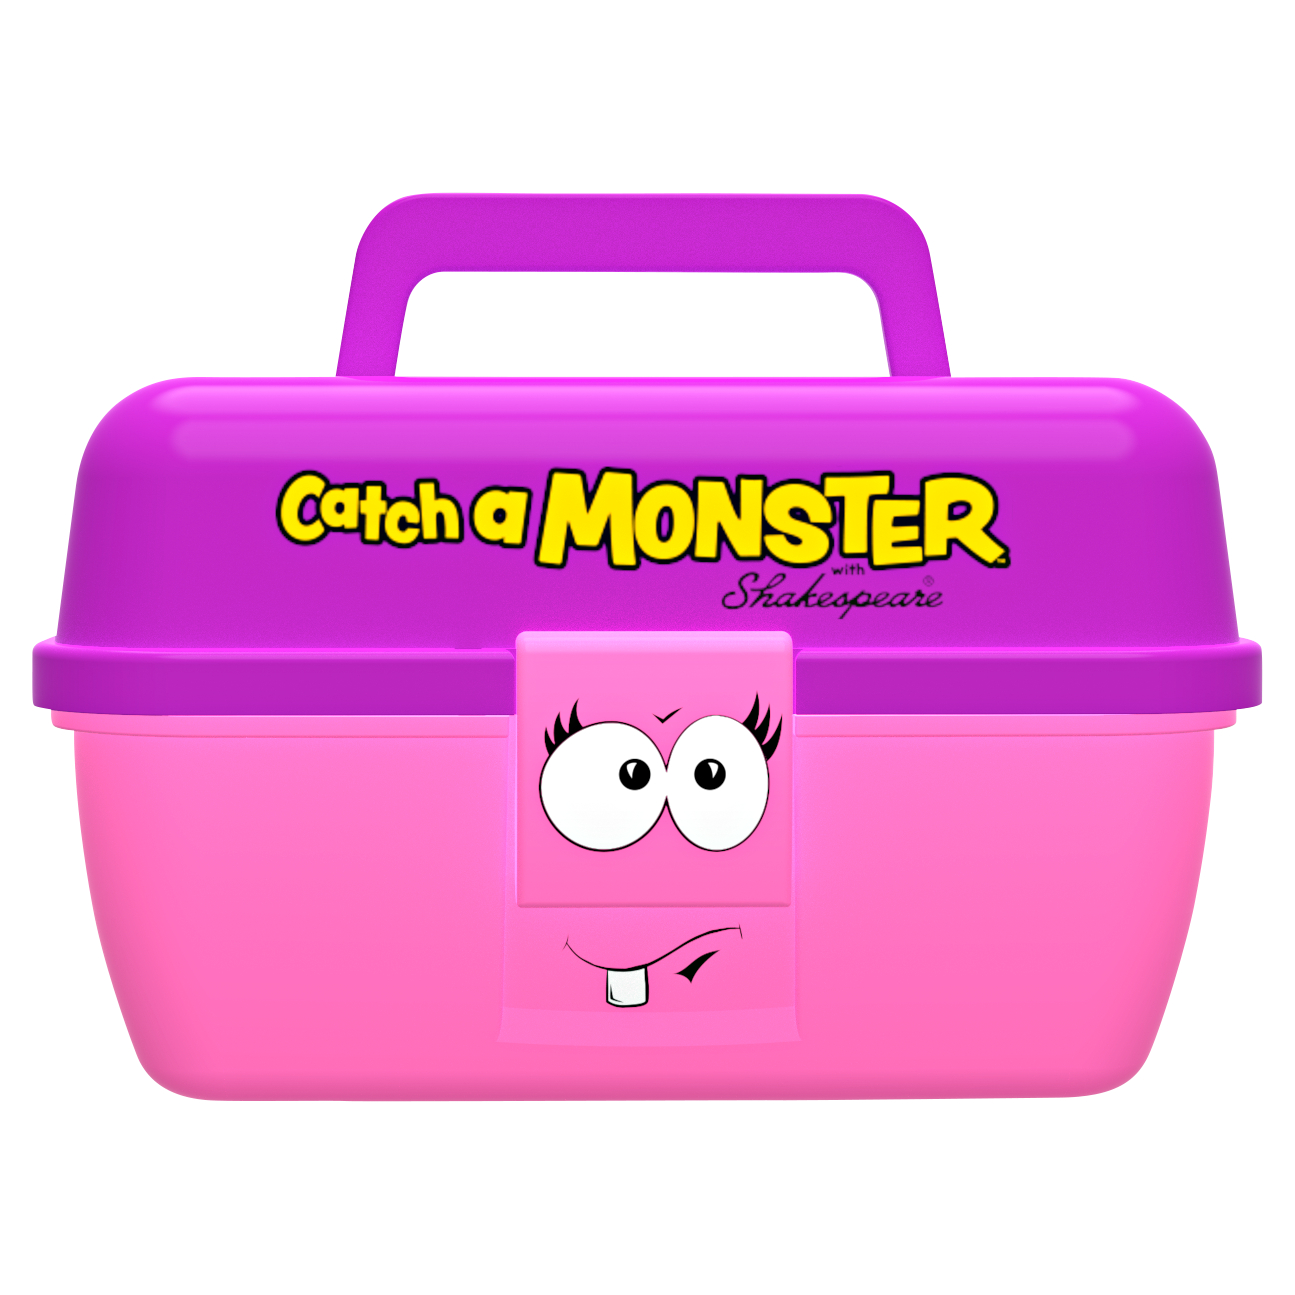 Shakespeare Multipurpose Catch a Monster Play Box (pink) 